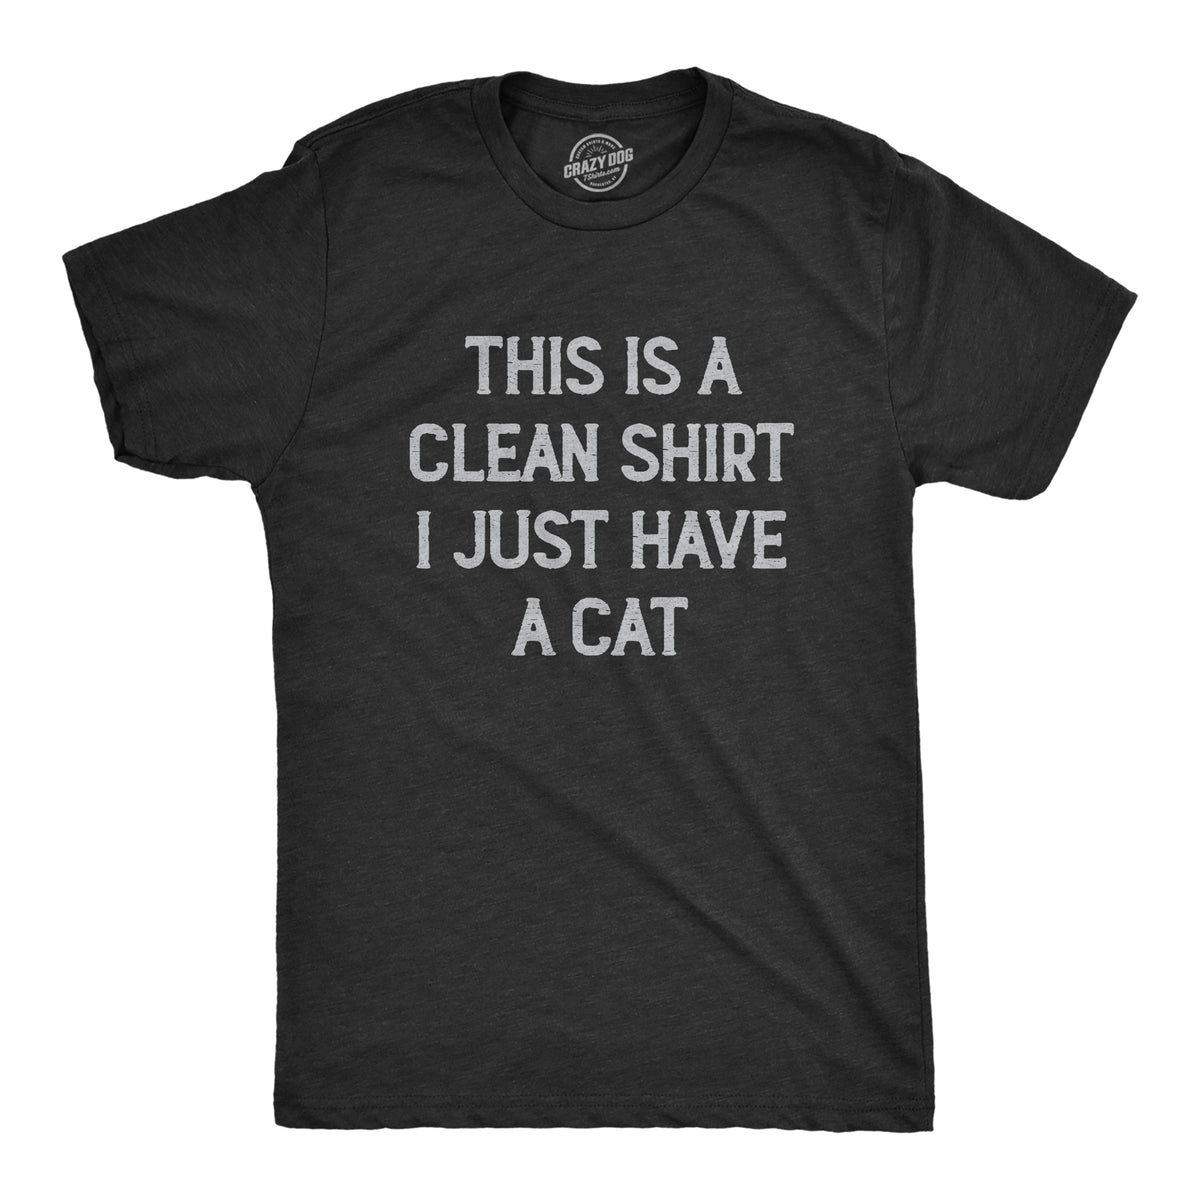 Funny Heather Black - CAT This Is A Clean Shirt I Just Have A Cat Mens T Shirt Nerdy cat sarcastic Tee